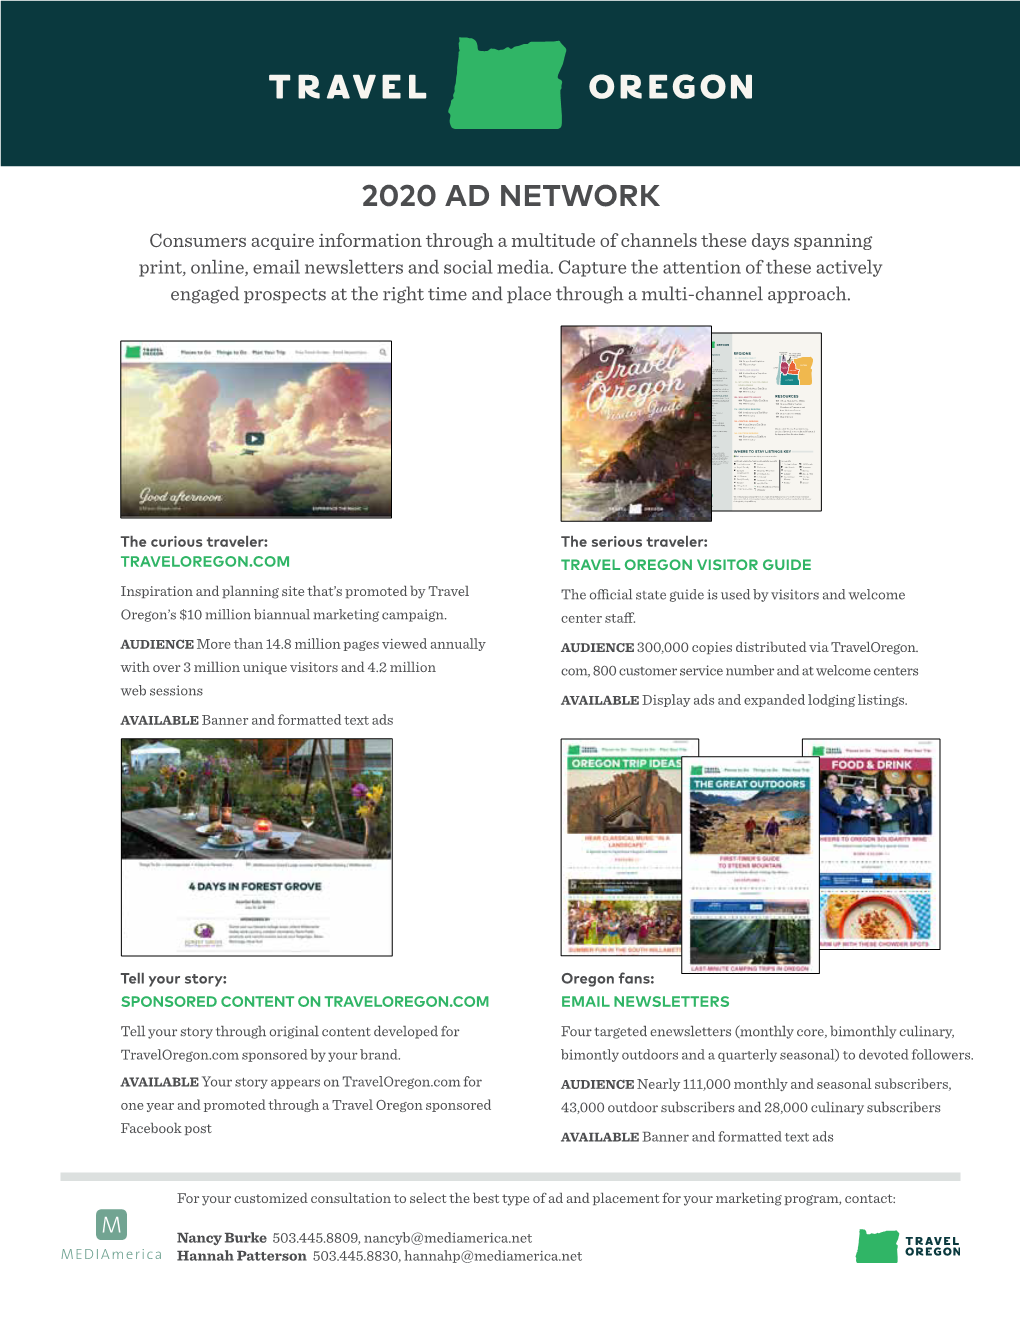 2020 AD NETWORK Consumers Acquire Information Through a Multitude of Channels These Days Spanning Print, Online, Email Newsletters and Social Media